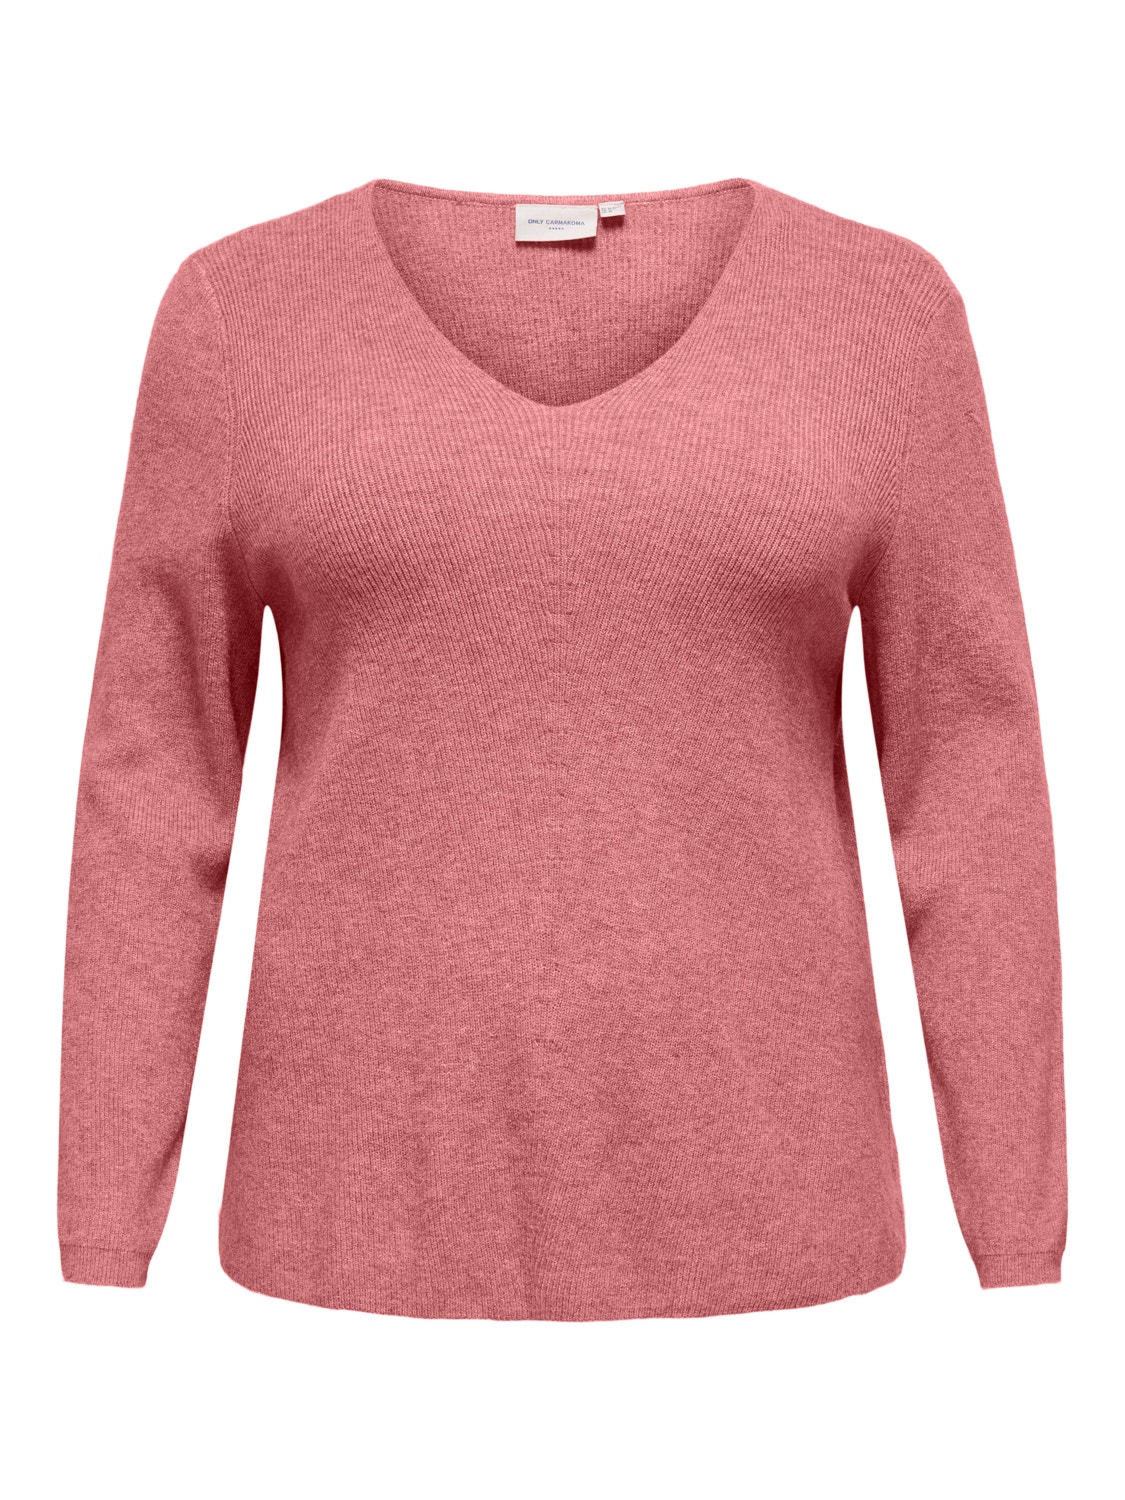 ONLY Pull-overs -Dusty Rose - 15220491